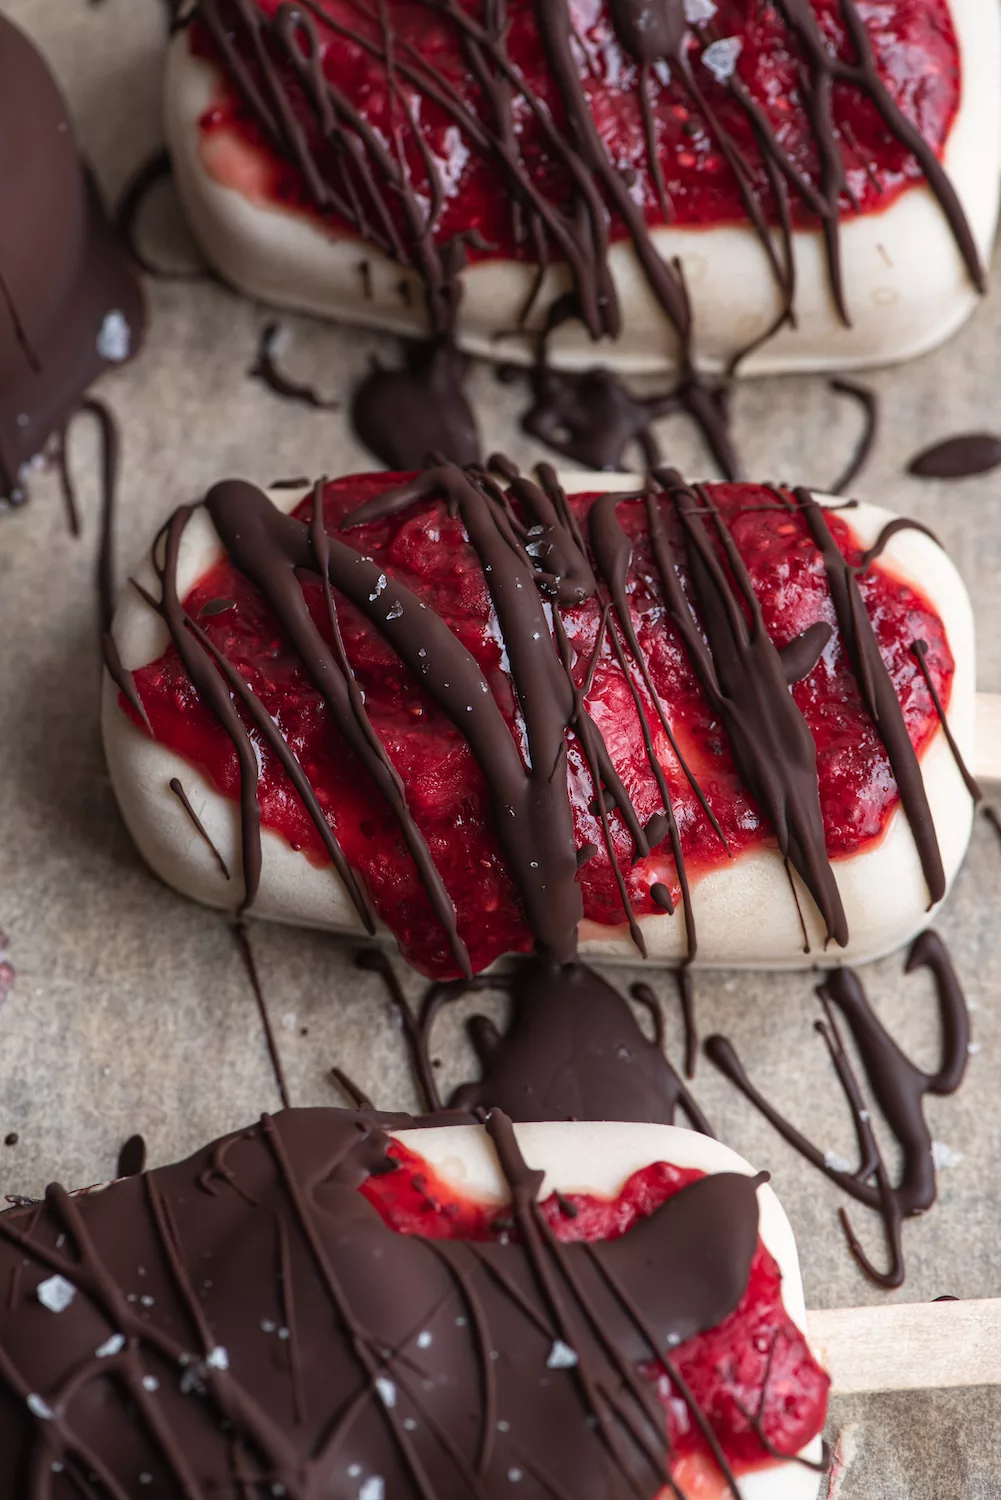 Jam covered ice cream bars with chocolate drizzled on top